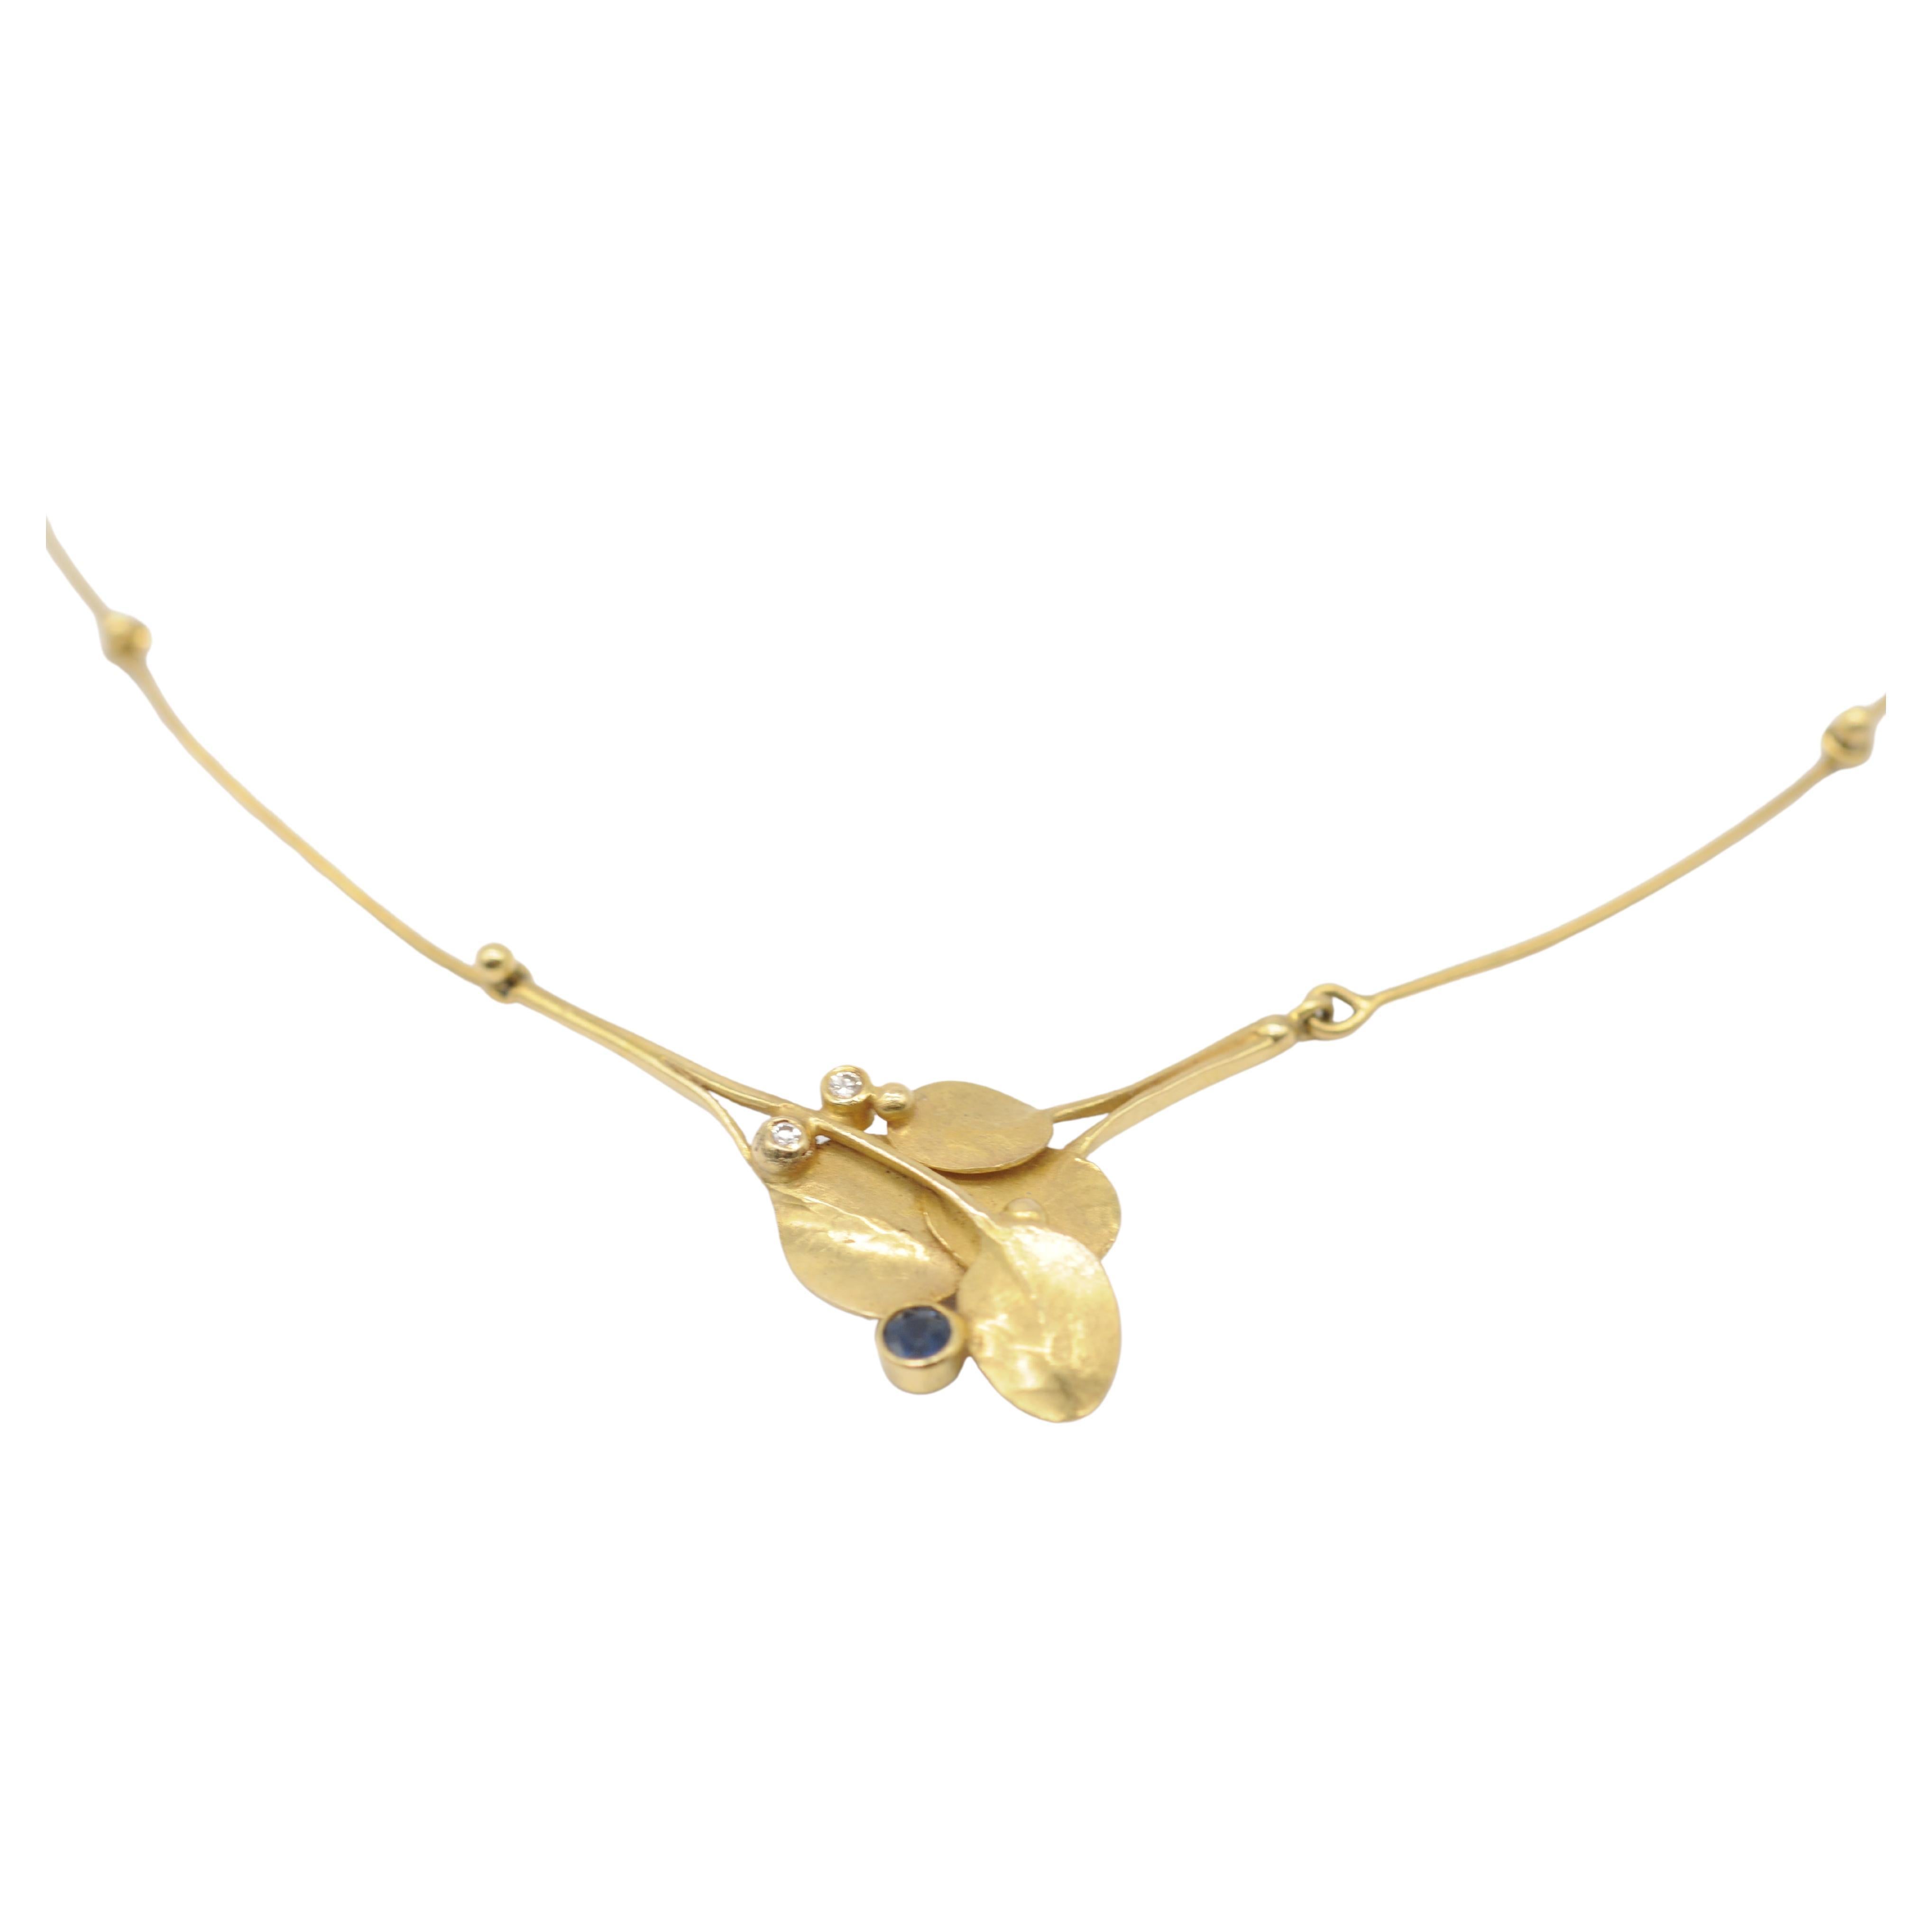 Embark on a journey of timeless beauty with this enchanting piece of authentic German craftsmanship, a creation of the goldsmith master Wurzbacher from Germany. Meticulously handcrafted in 18k yellow gold, this stunning necklace showcases the true